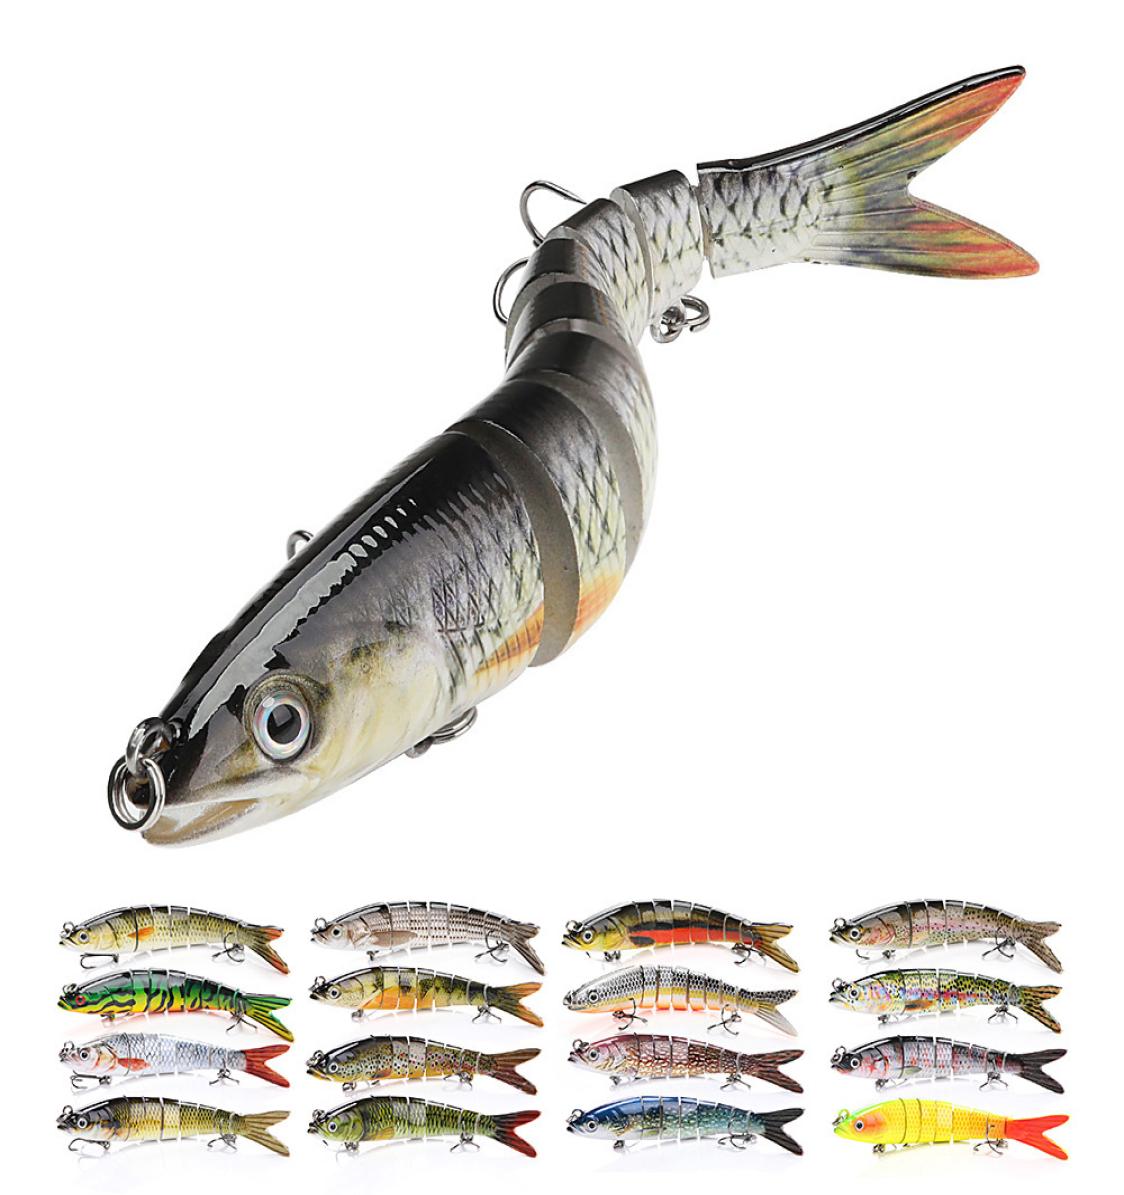 

14cm Sinking Wobblers Fishing Lures Jointed Crankbait Swimbait 8 Segment Hard Artificial Bait For Fish Tackle Lure4376090